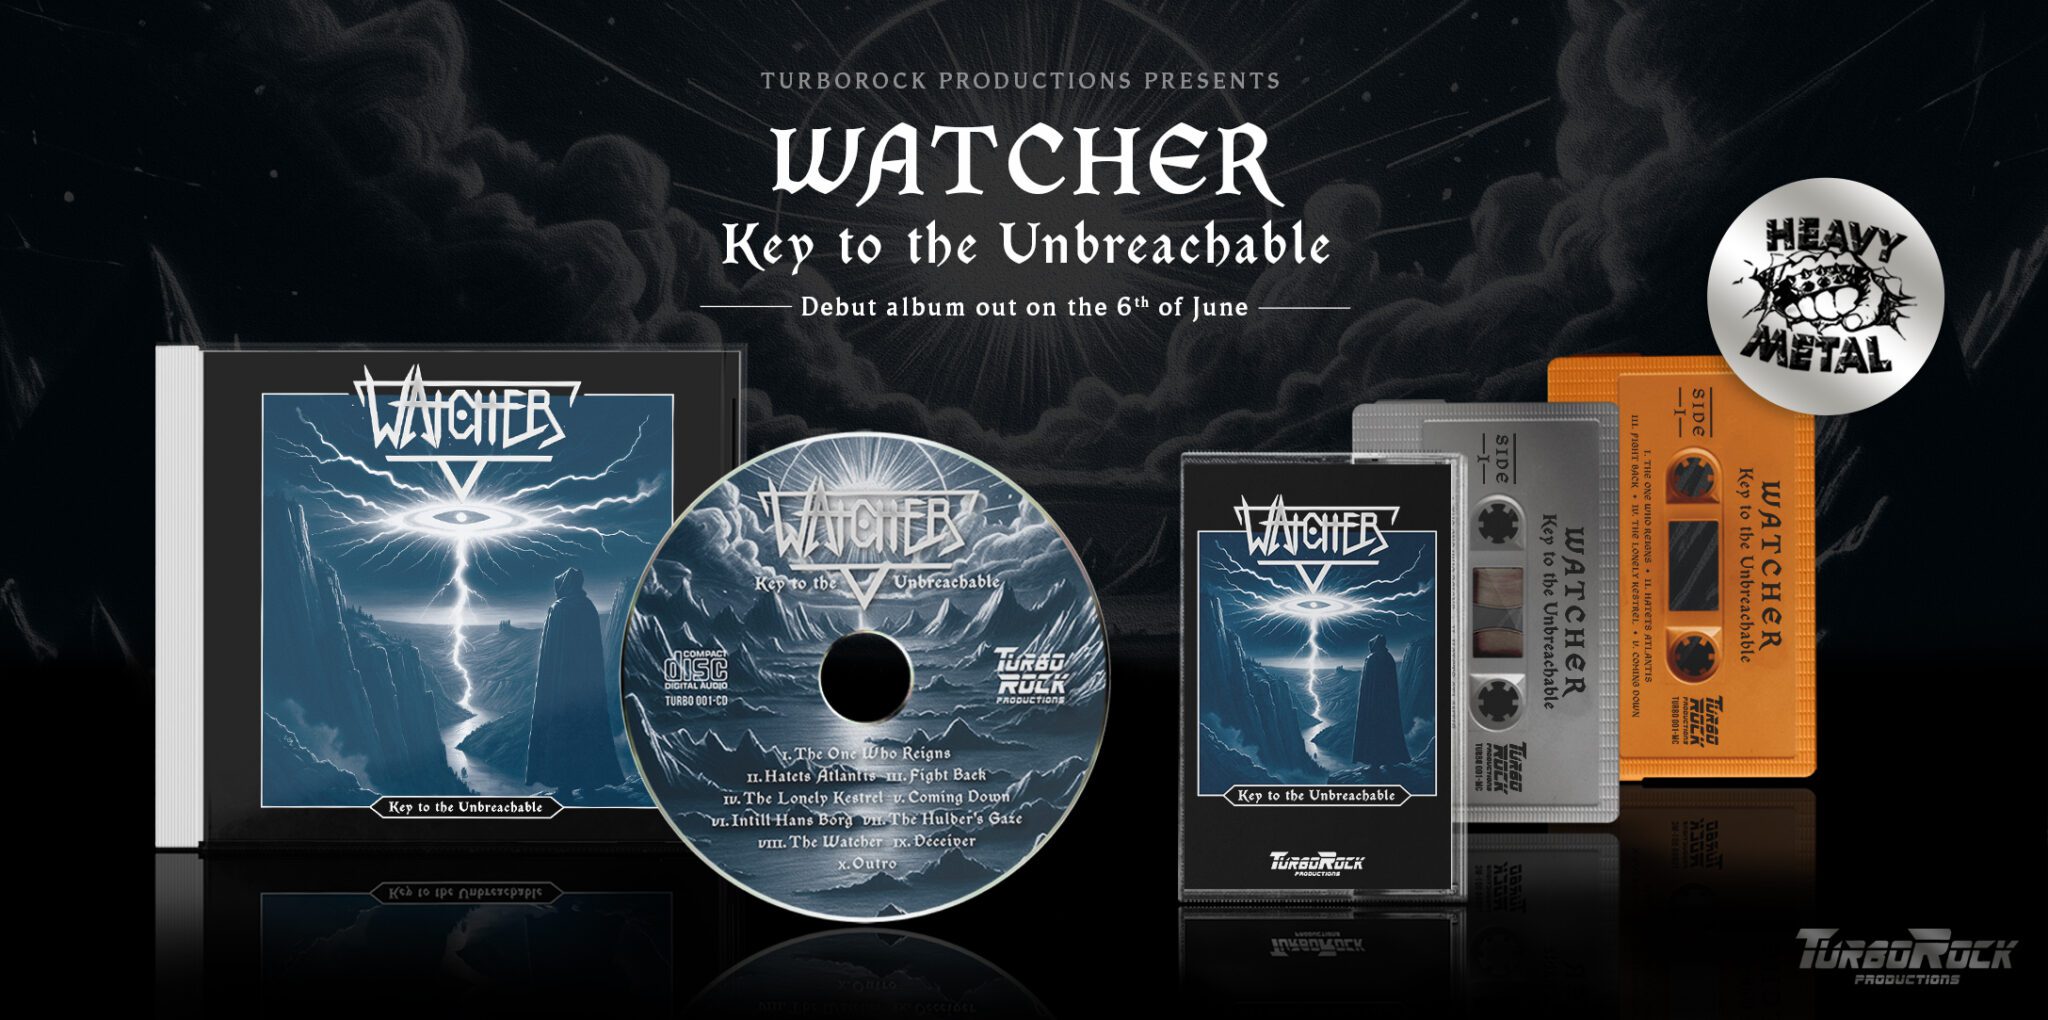 Turborock Productions Watcher Key to the Unbreachable CD TAPE Album Release Heavy Metal FWOSHM